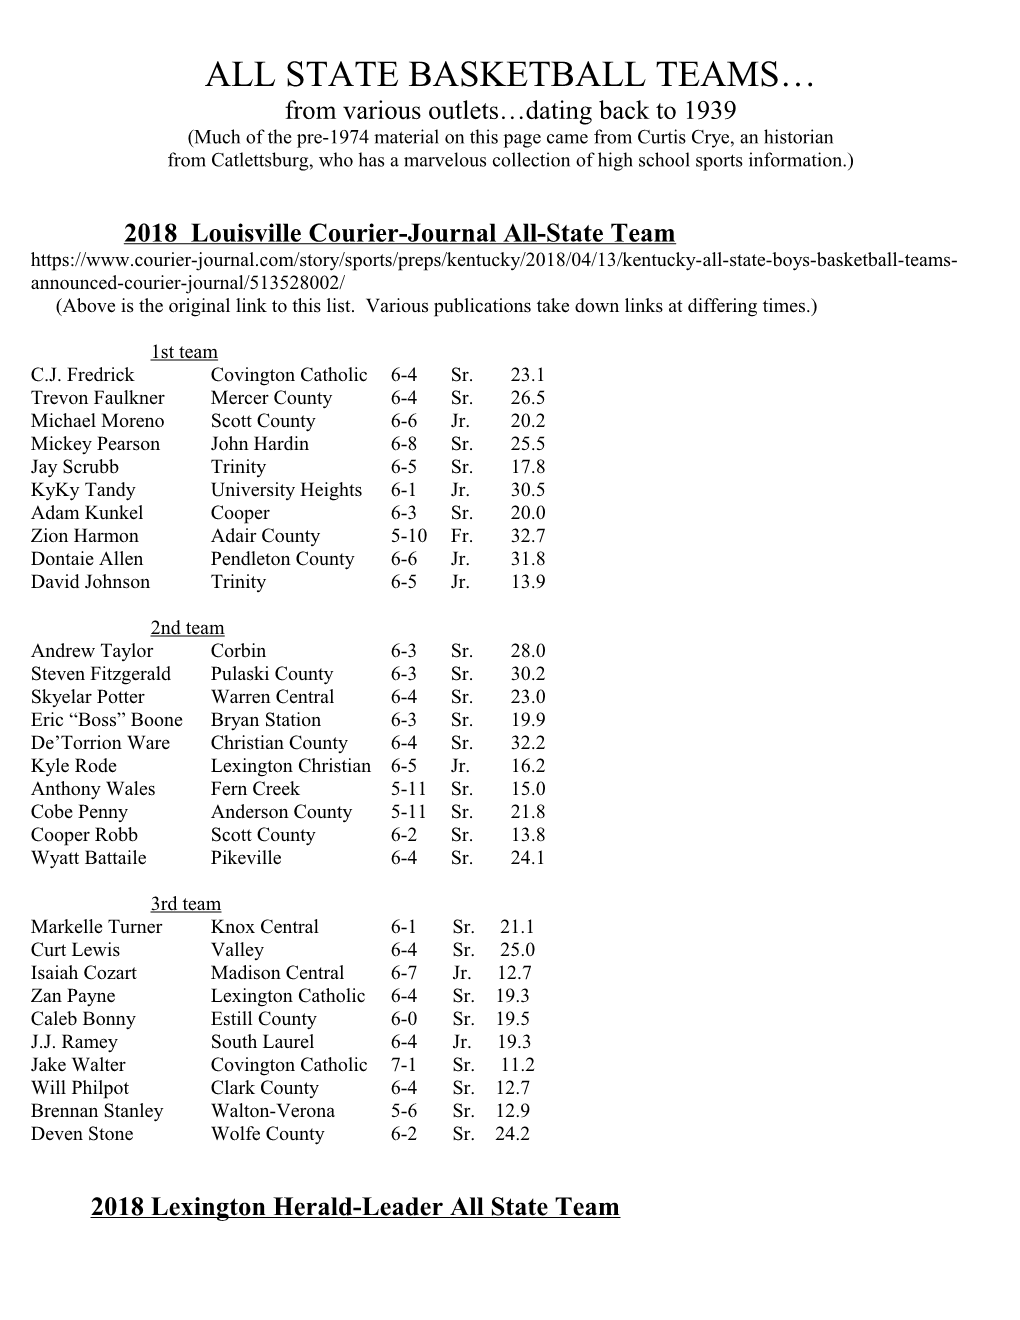 2012 Louisville Courier-Journal All-State Team